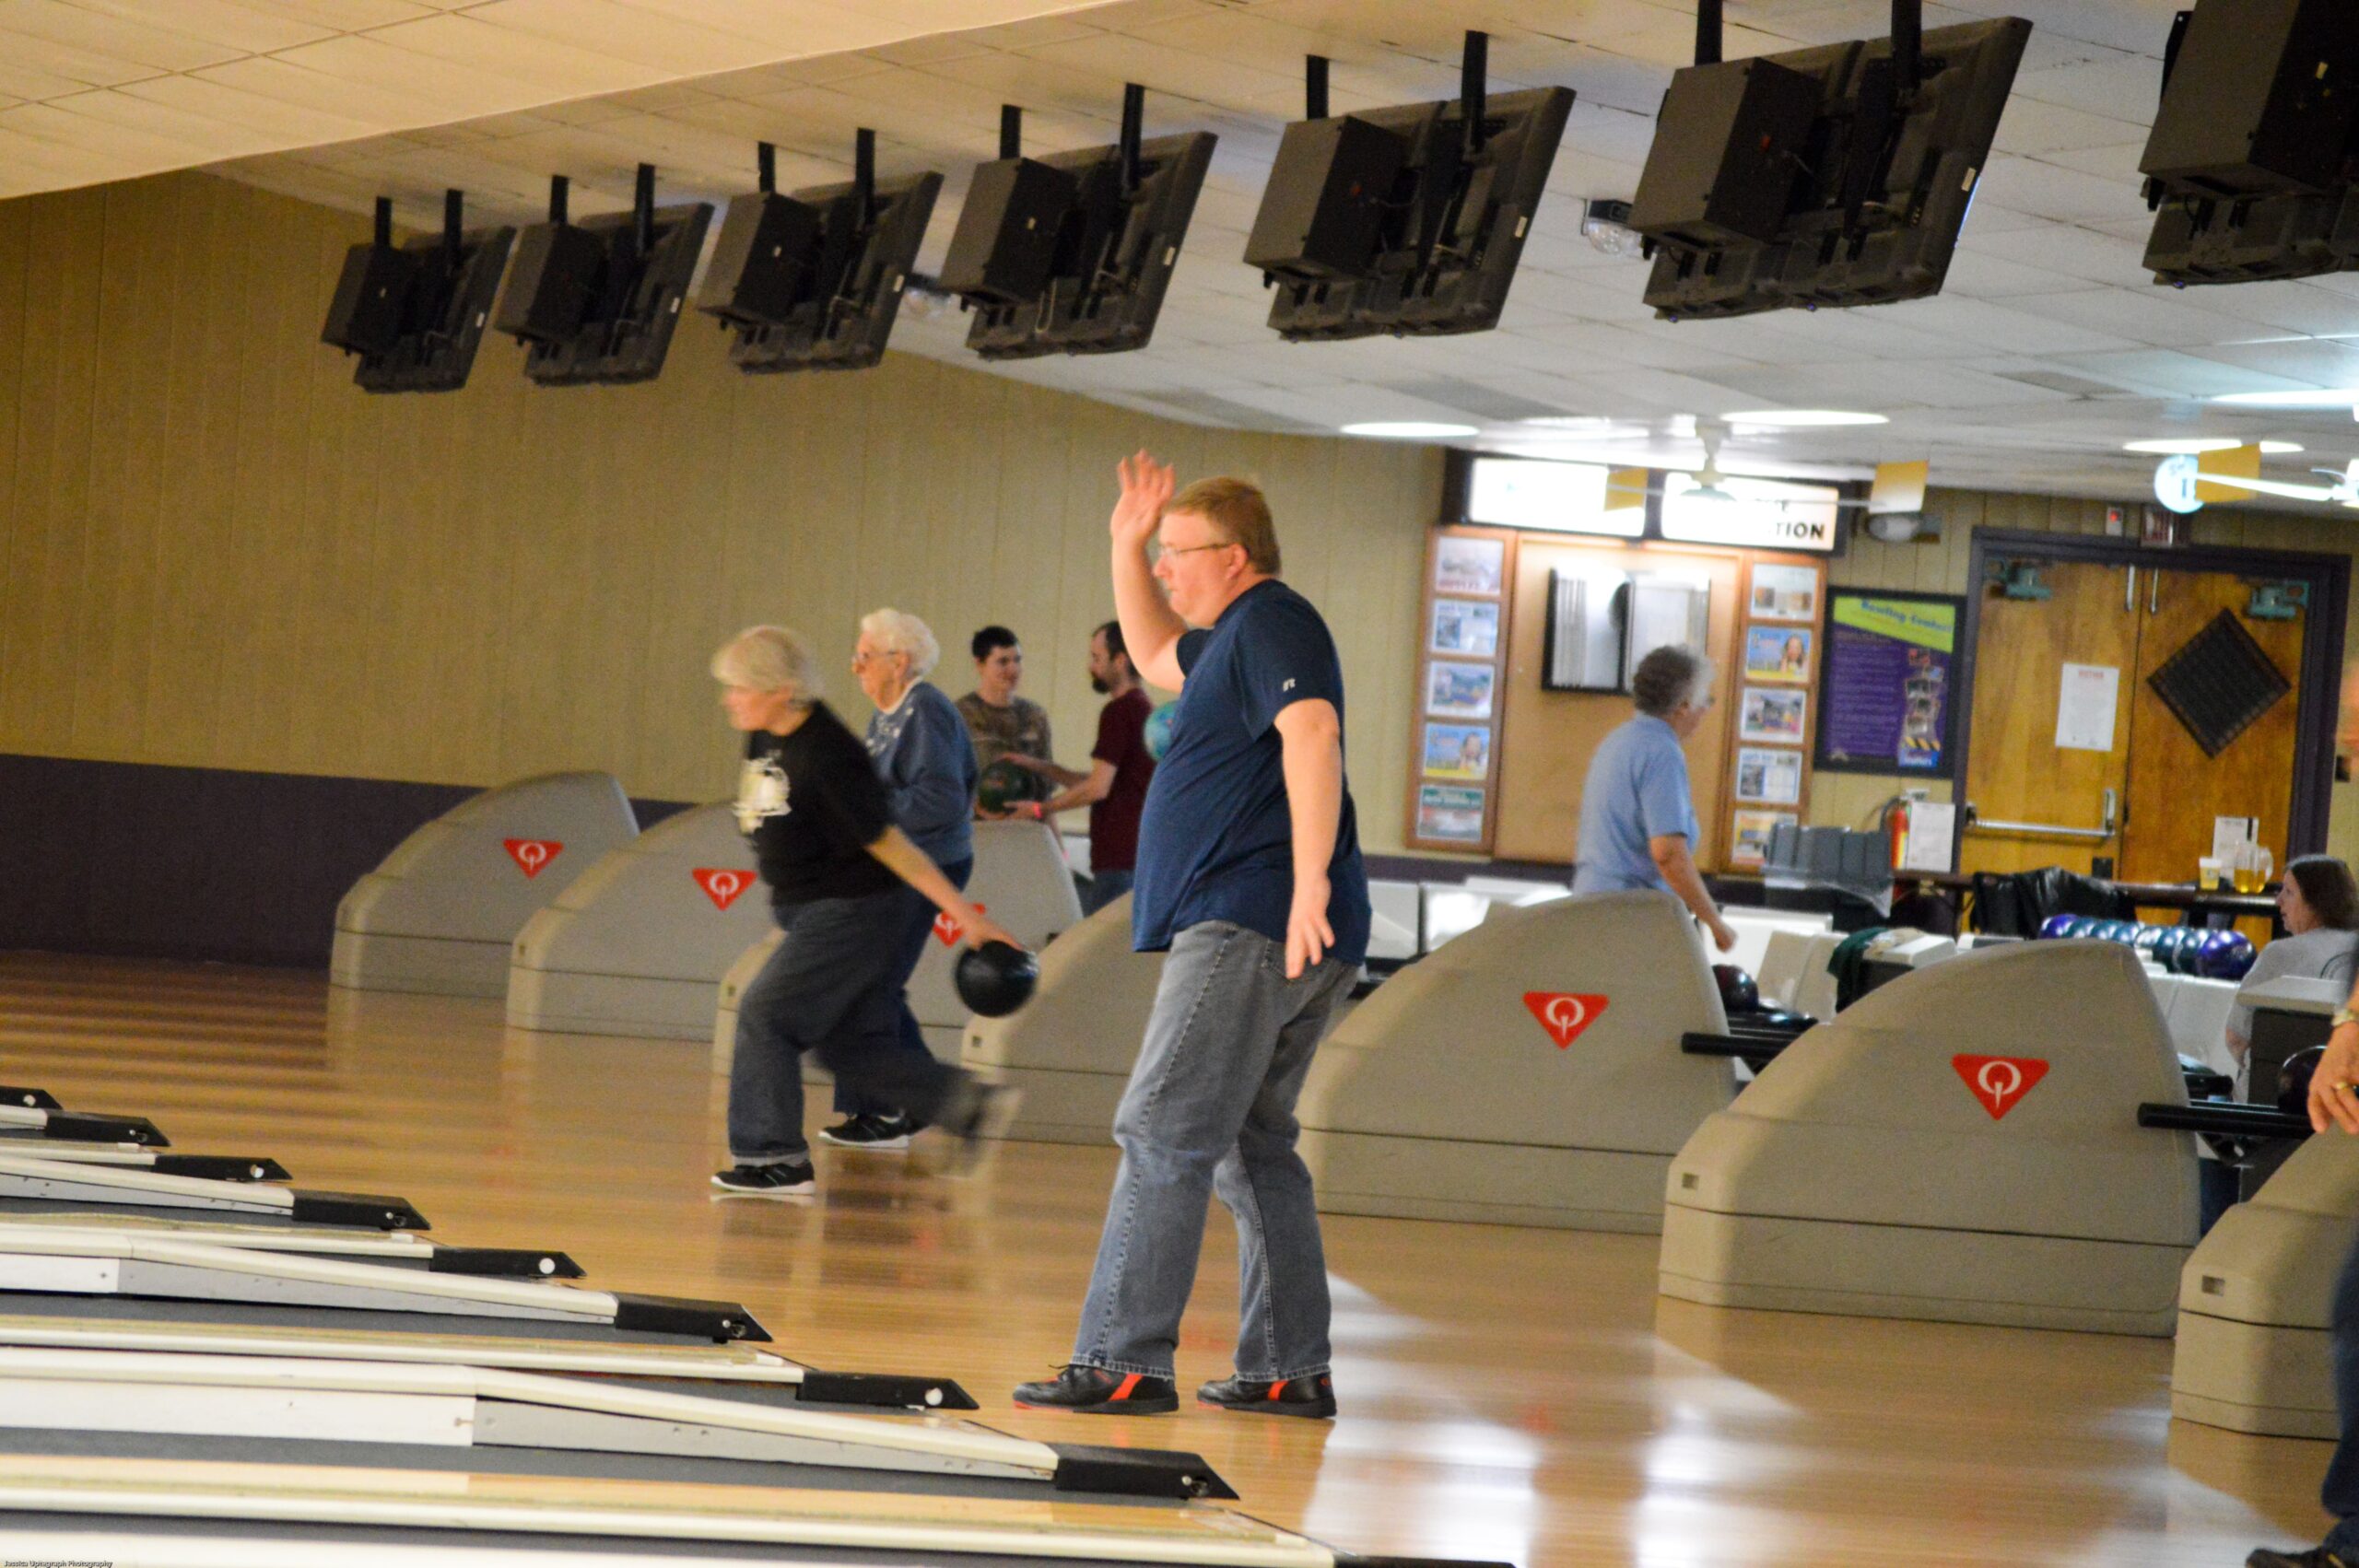 Corporate Team Building with a Twist: Organizing a Memorable Bowling Event